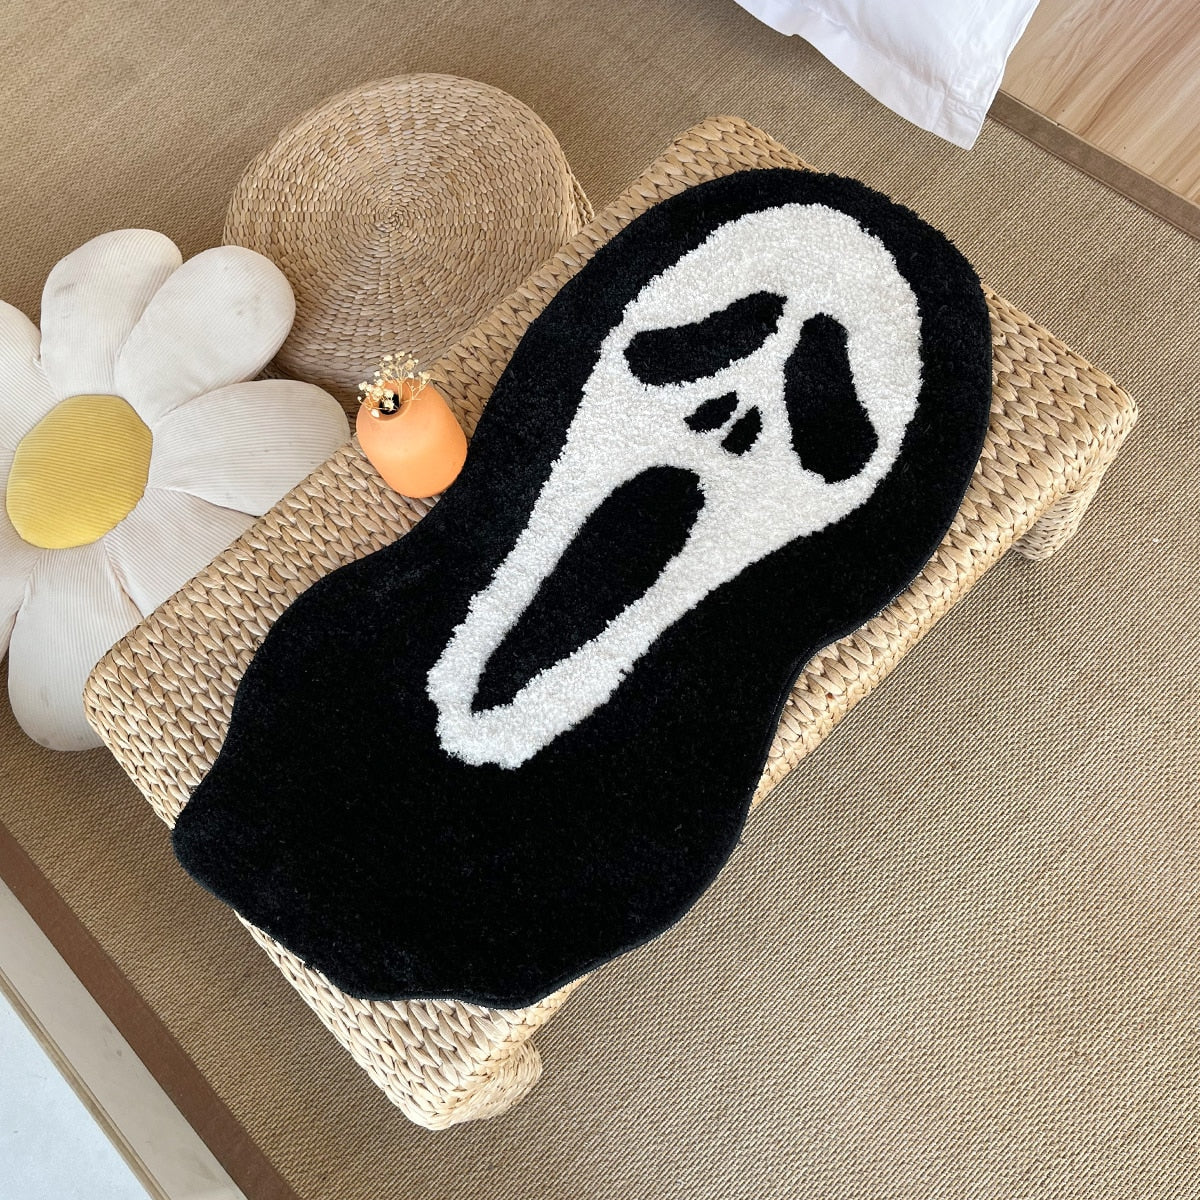 CORX Designs - Scream Ghost Face Rug - Review